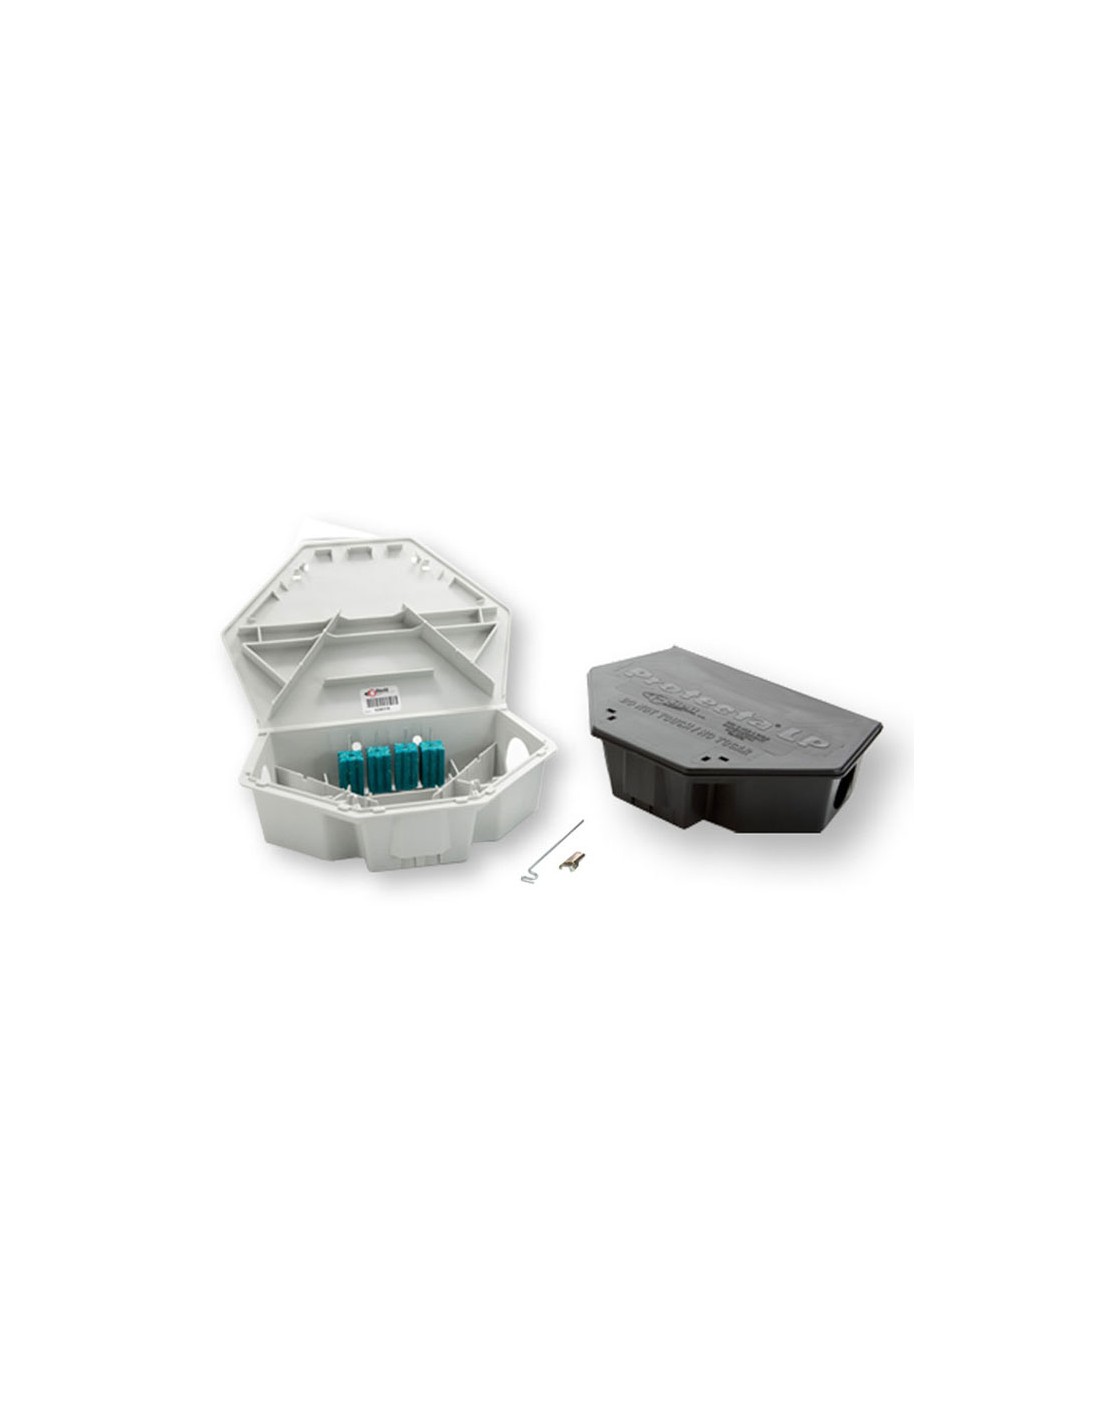 Bell Protecta LP Bait Station Questions & Answers